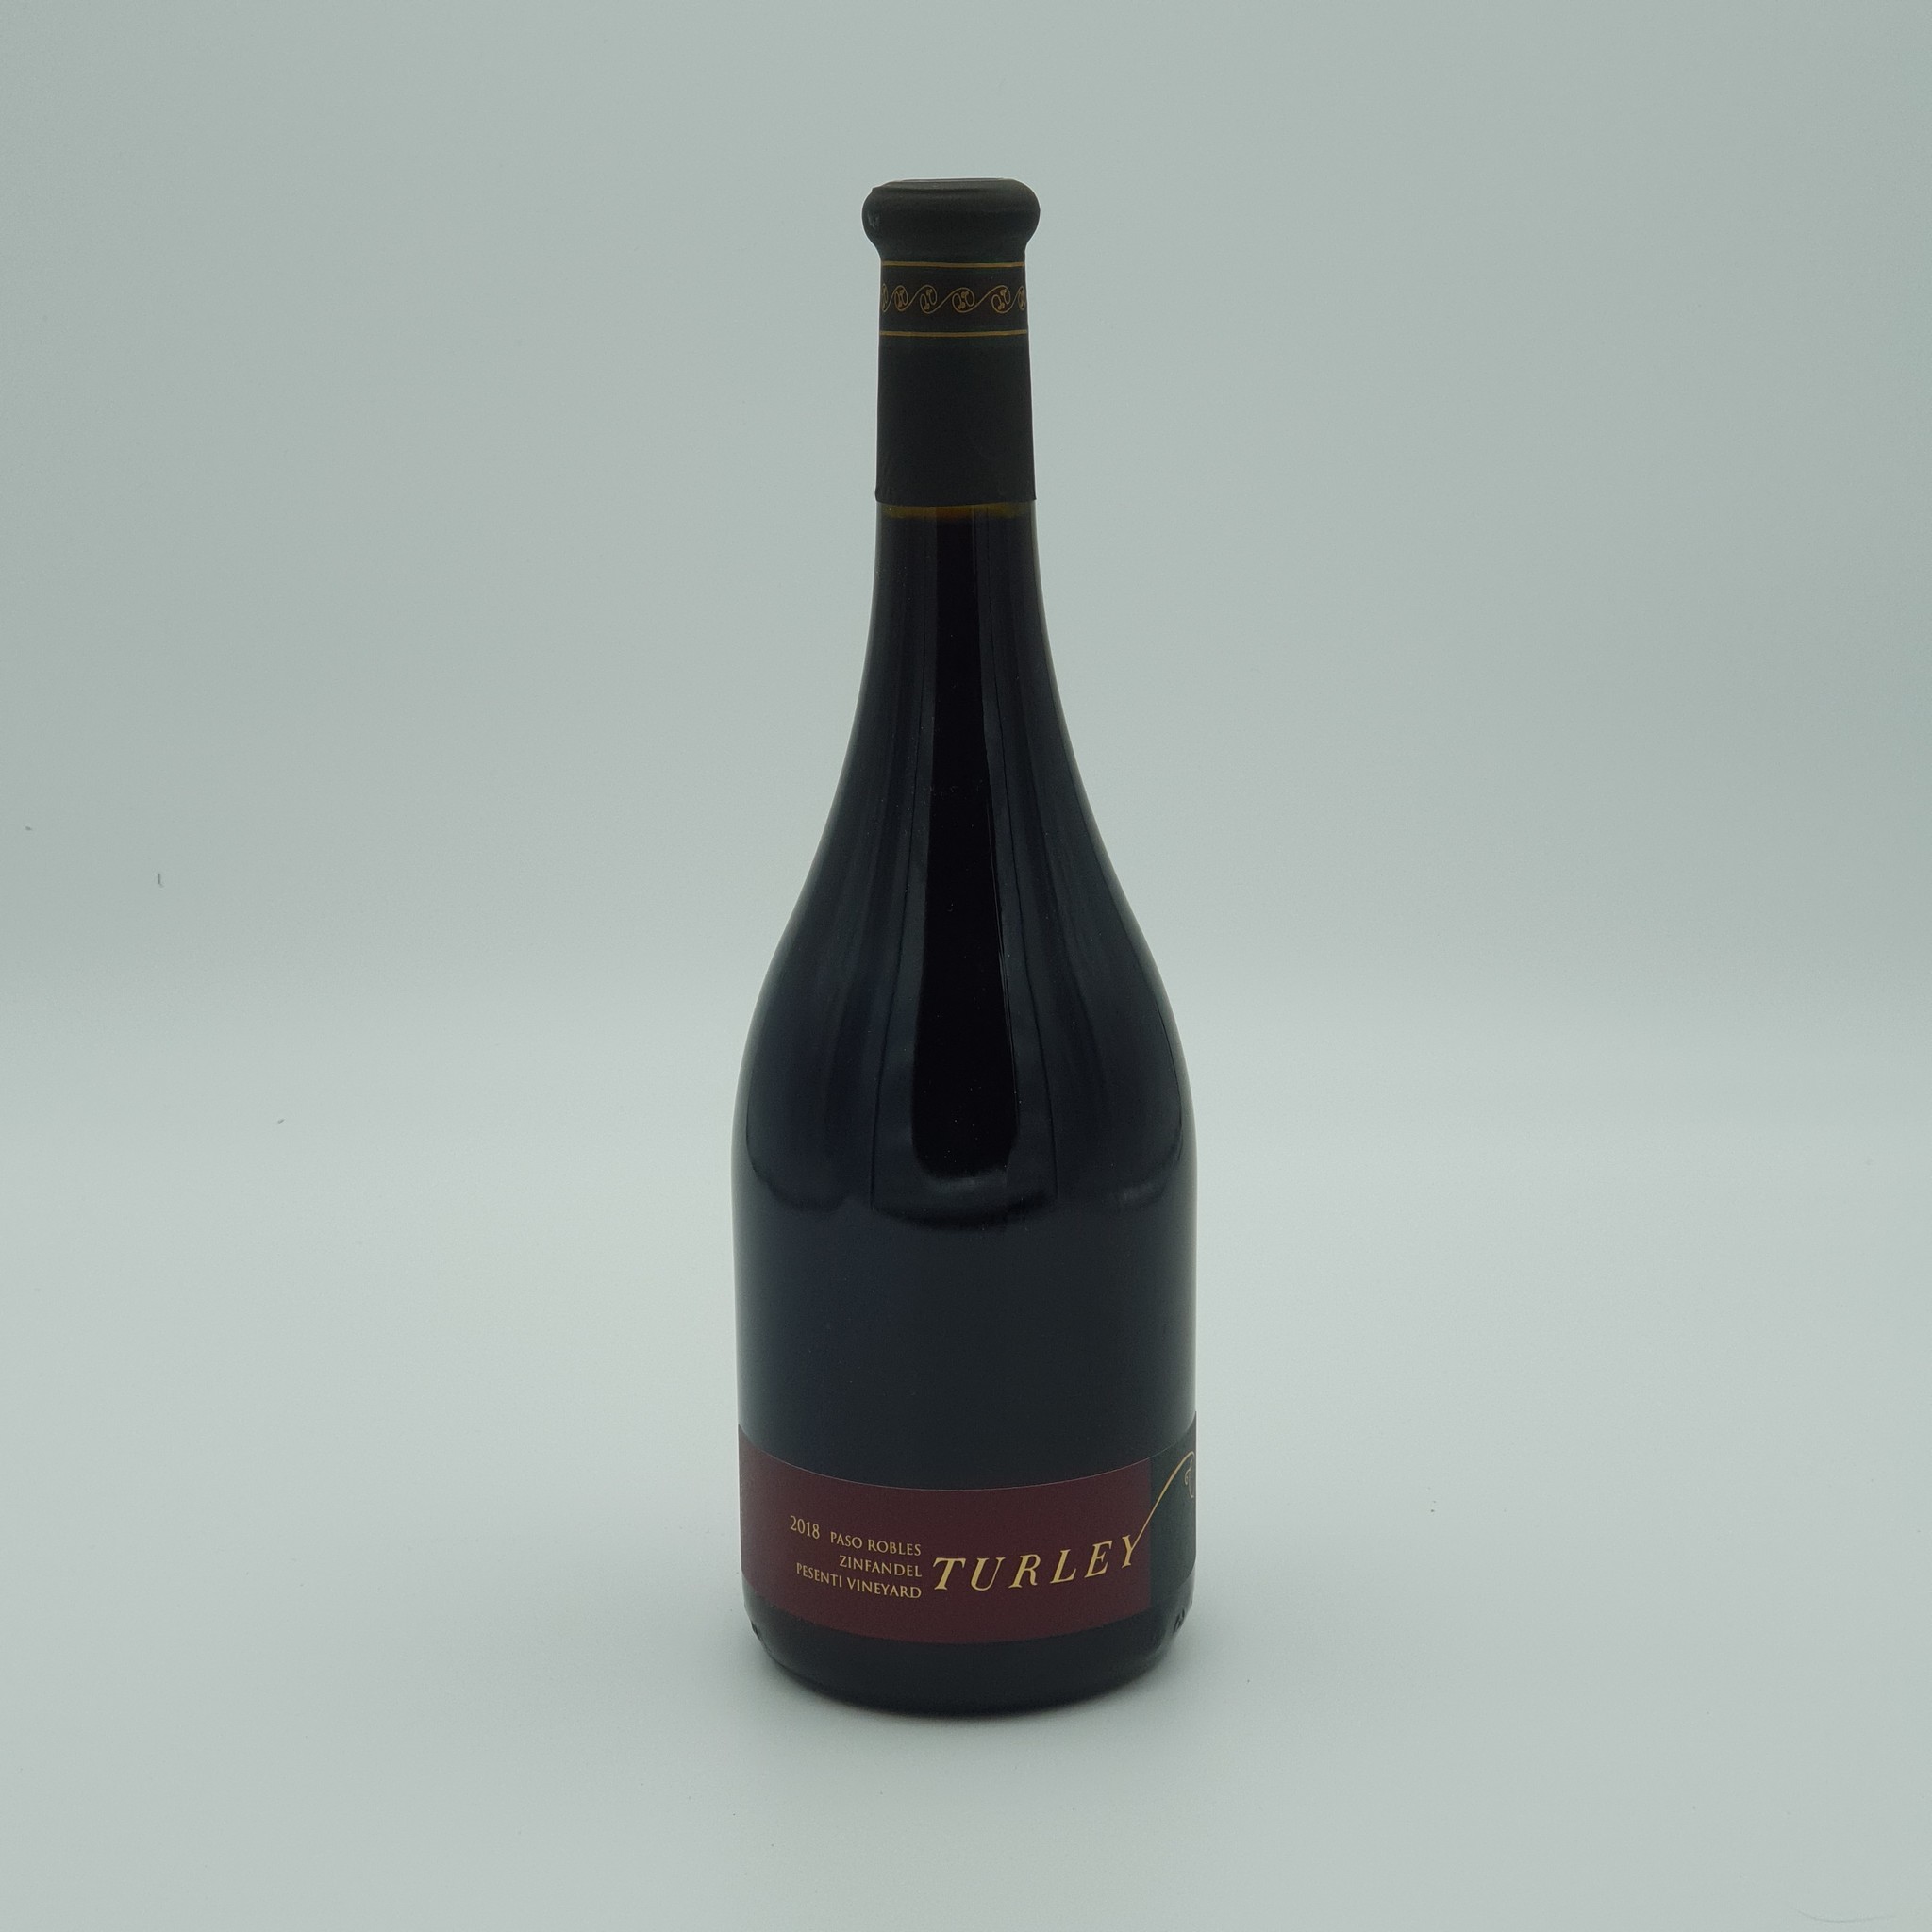 Turley Wines, 'Pesenti-Paso Robles', Zinfandel, 2018